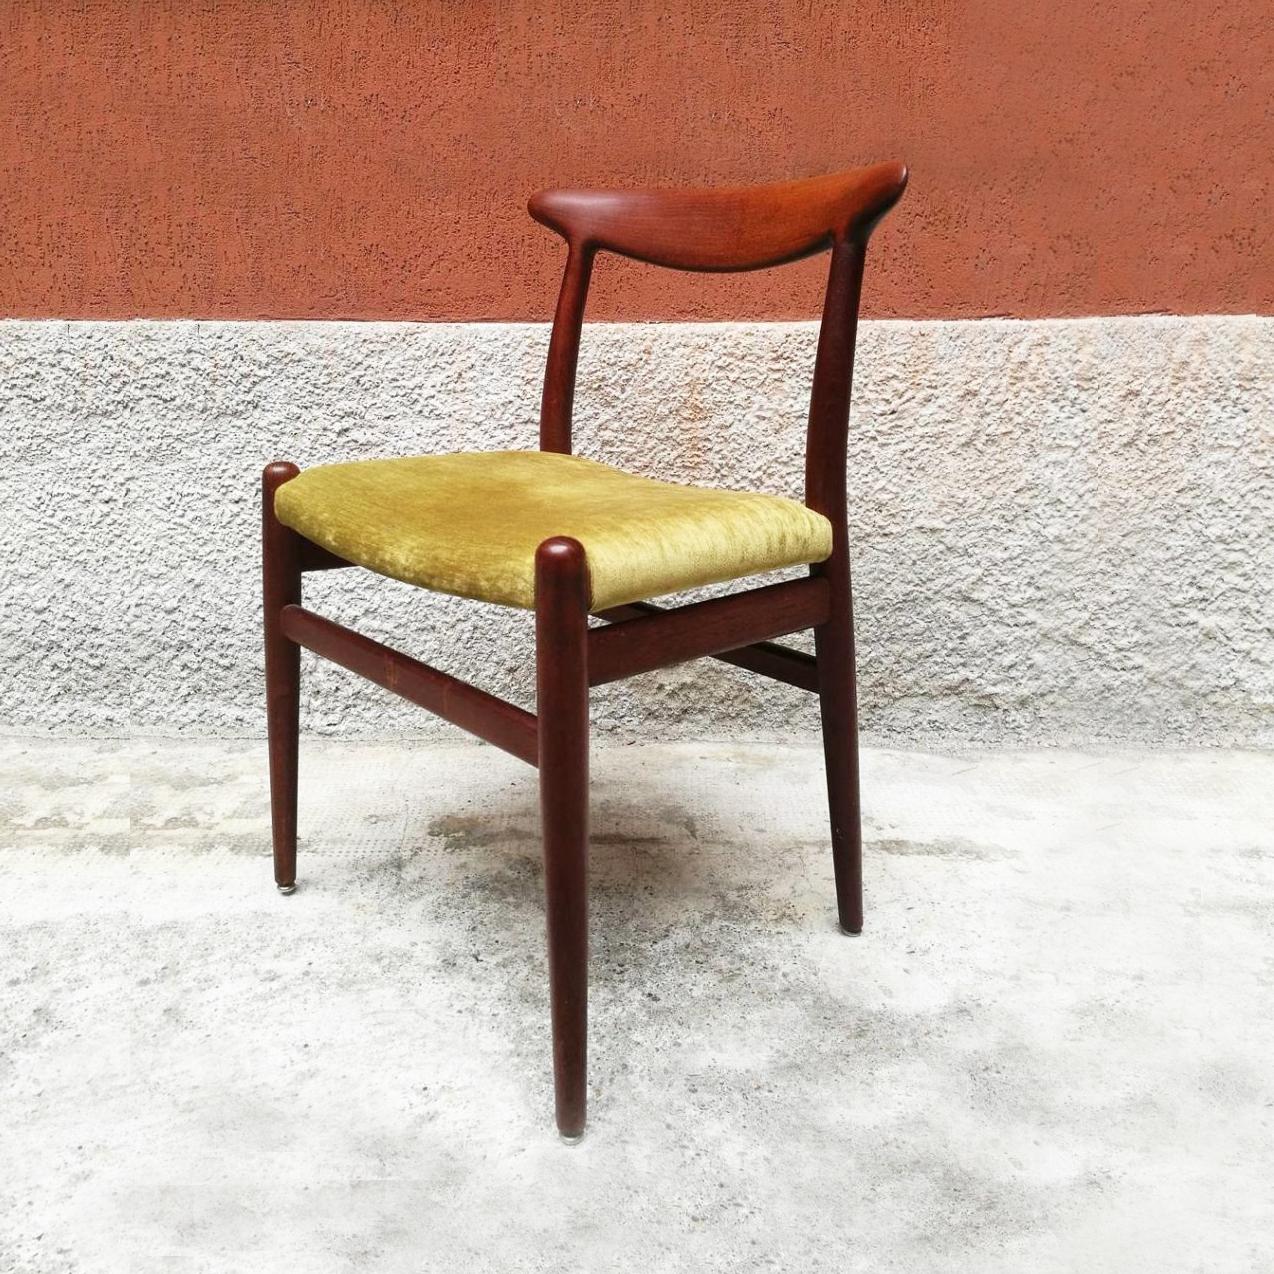 Danish solid teak and velvet chairs by Hans Wegner by Madsens, 1950s
Set of six W2 chairs in solid teak with velvet seat.
Made by Madsens, Denmark.
Excellent state of conservation.
Measures: 46 x 58 x 76 H cm backrest.